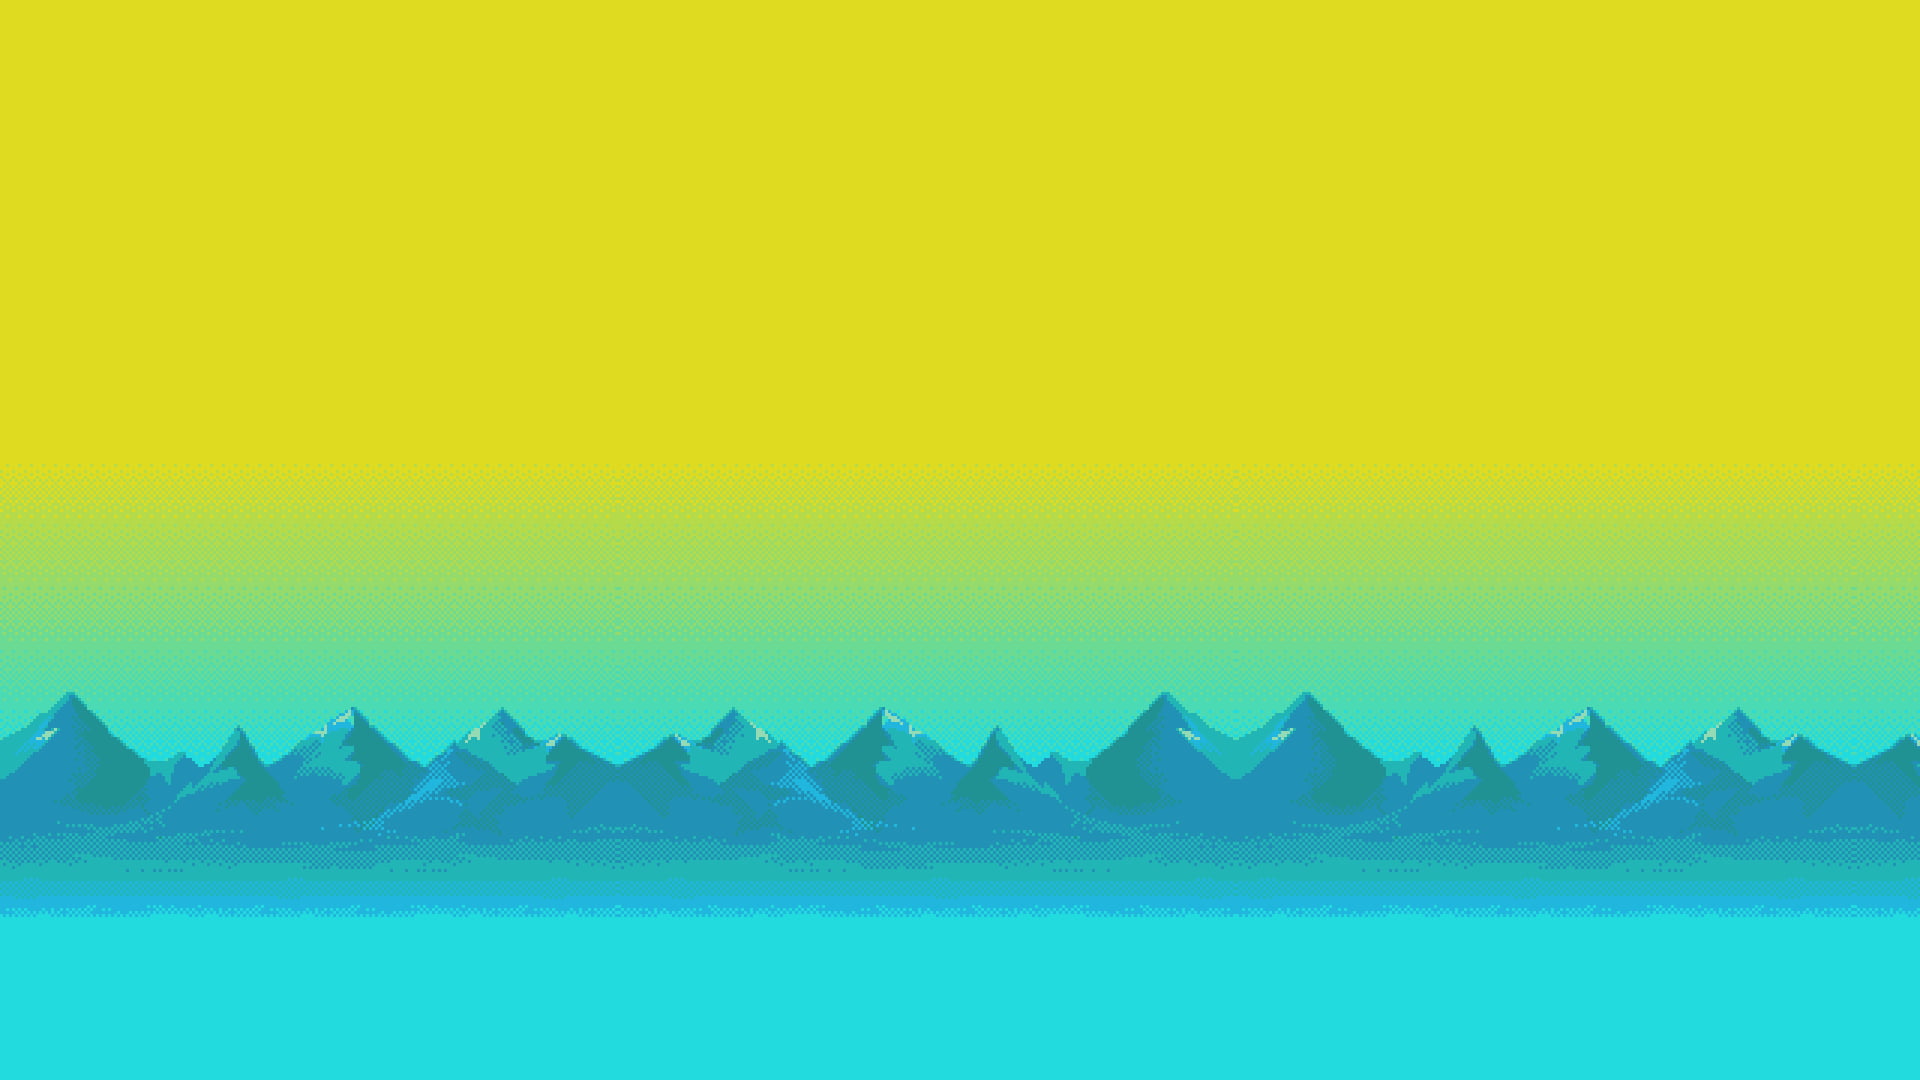 field of mountains illustration, pixel art, water, copy space